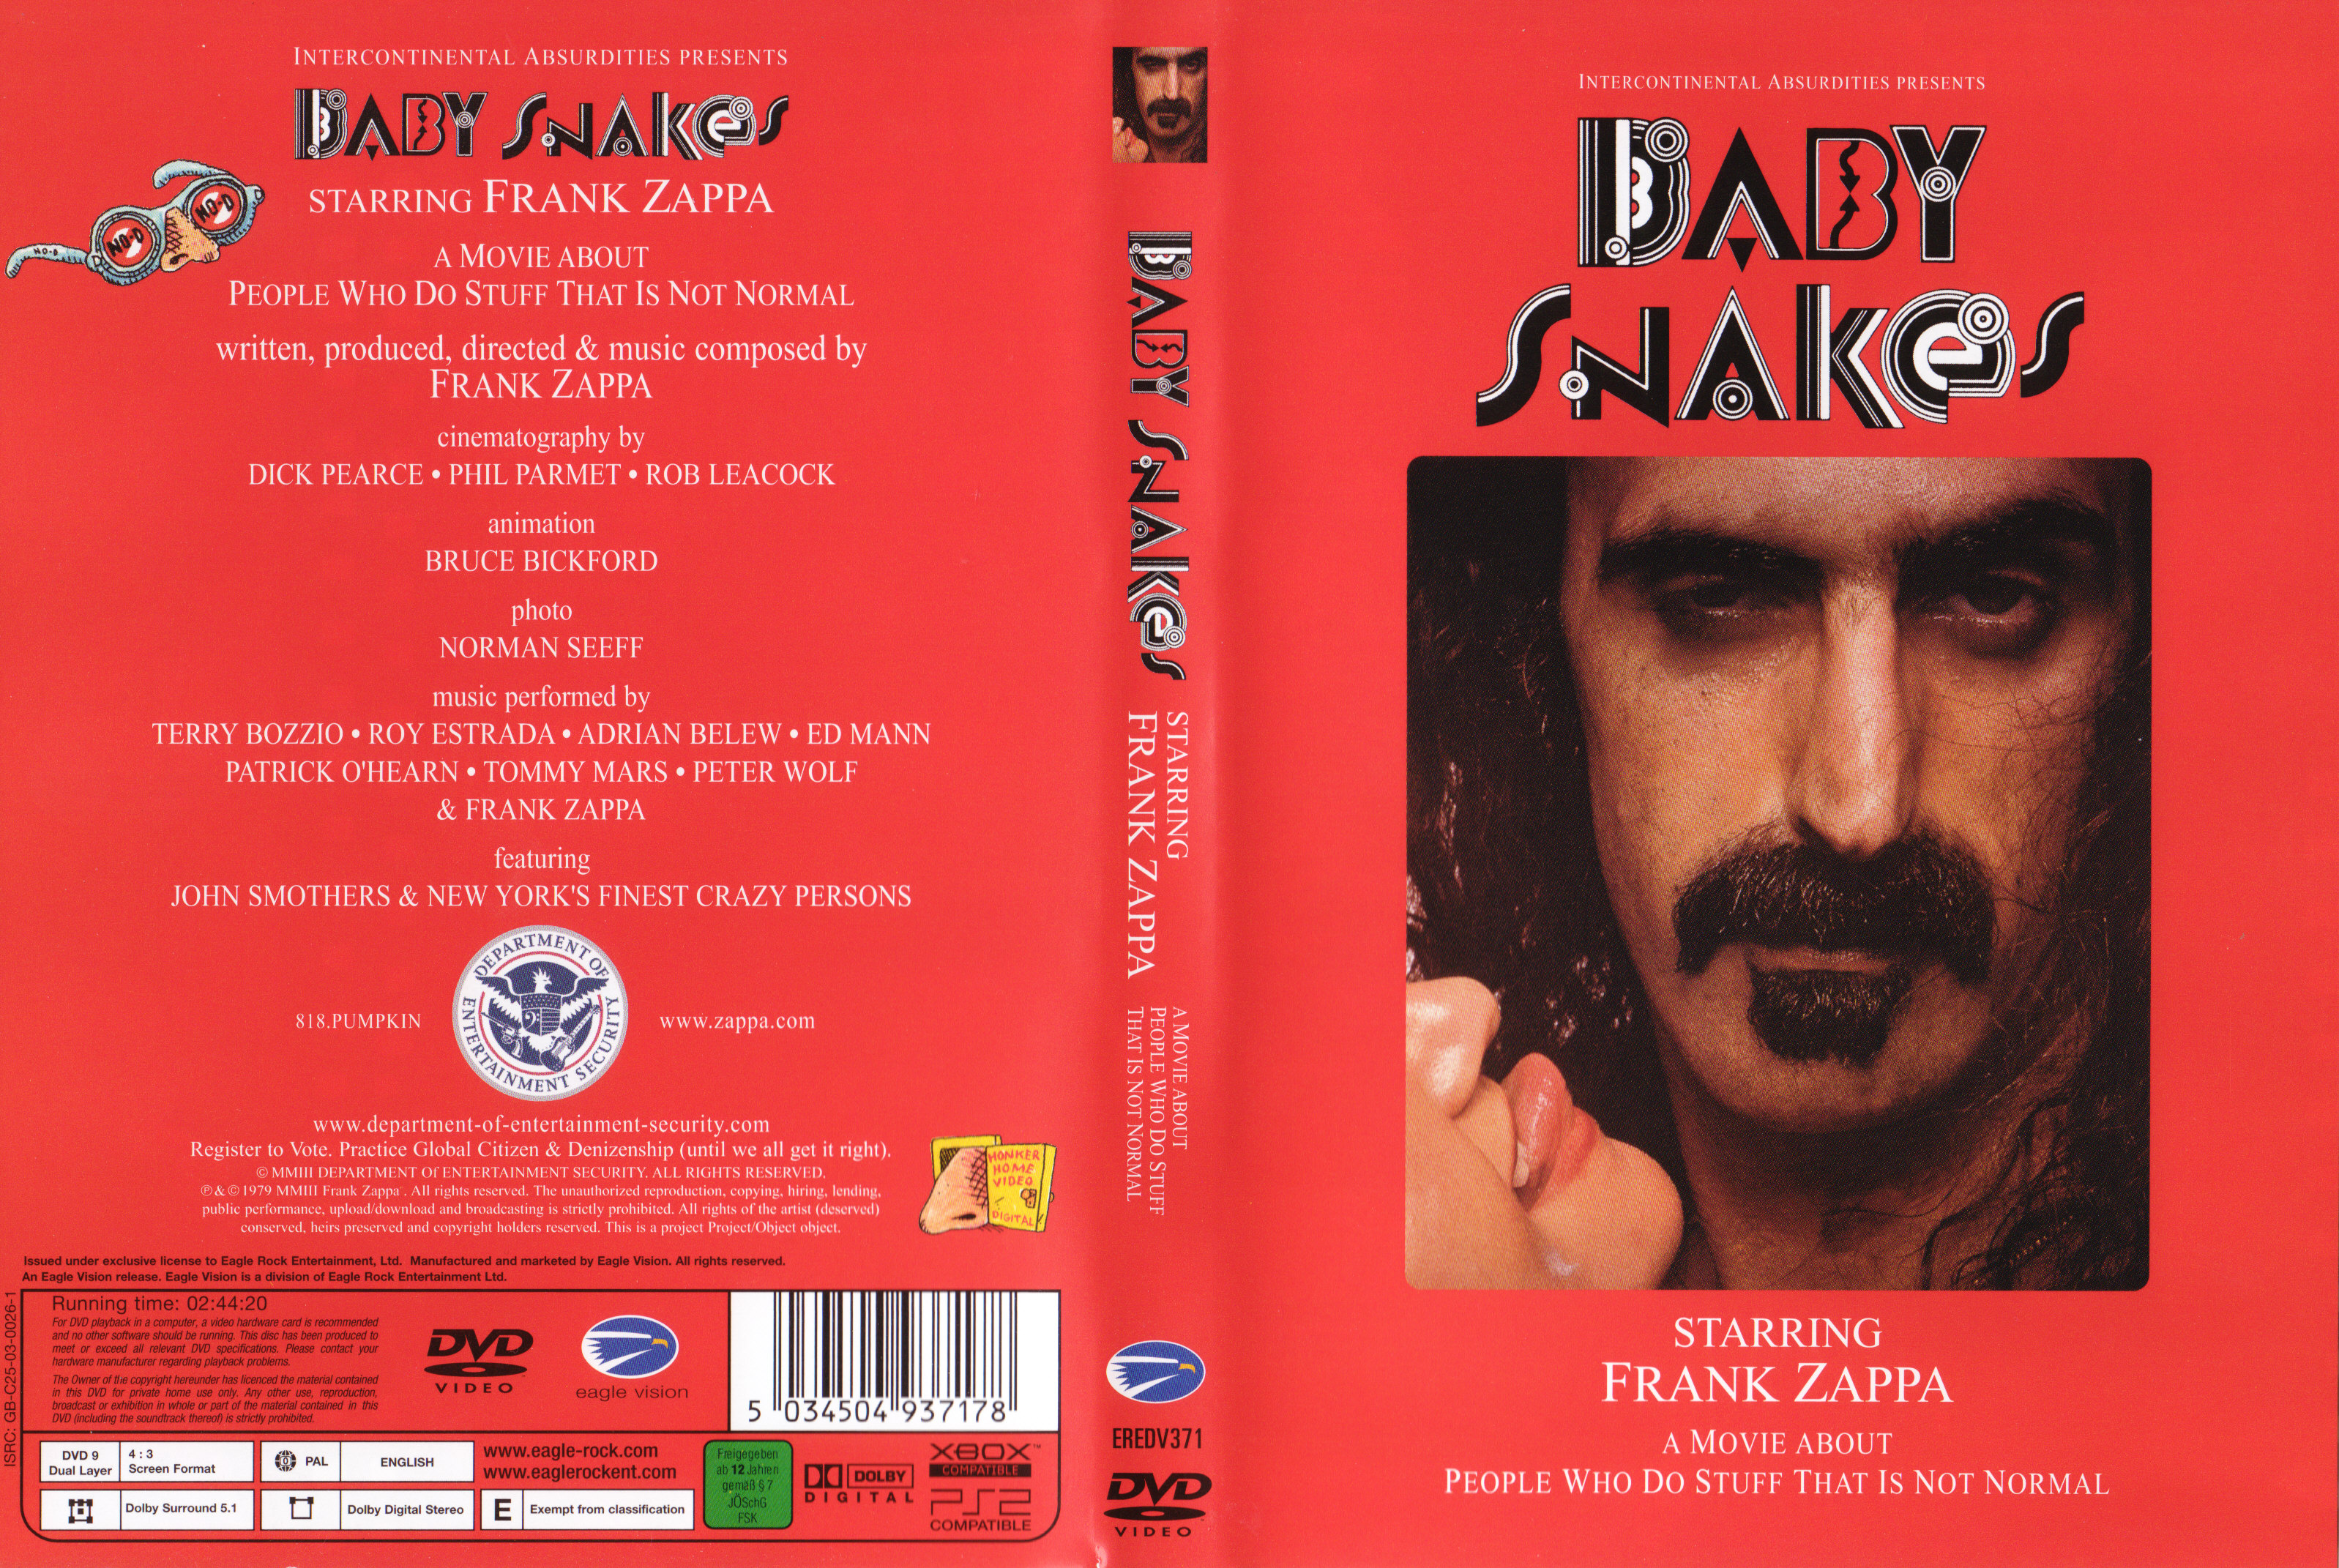 Jaquette DVD Frank Zappa Baby Snakes